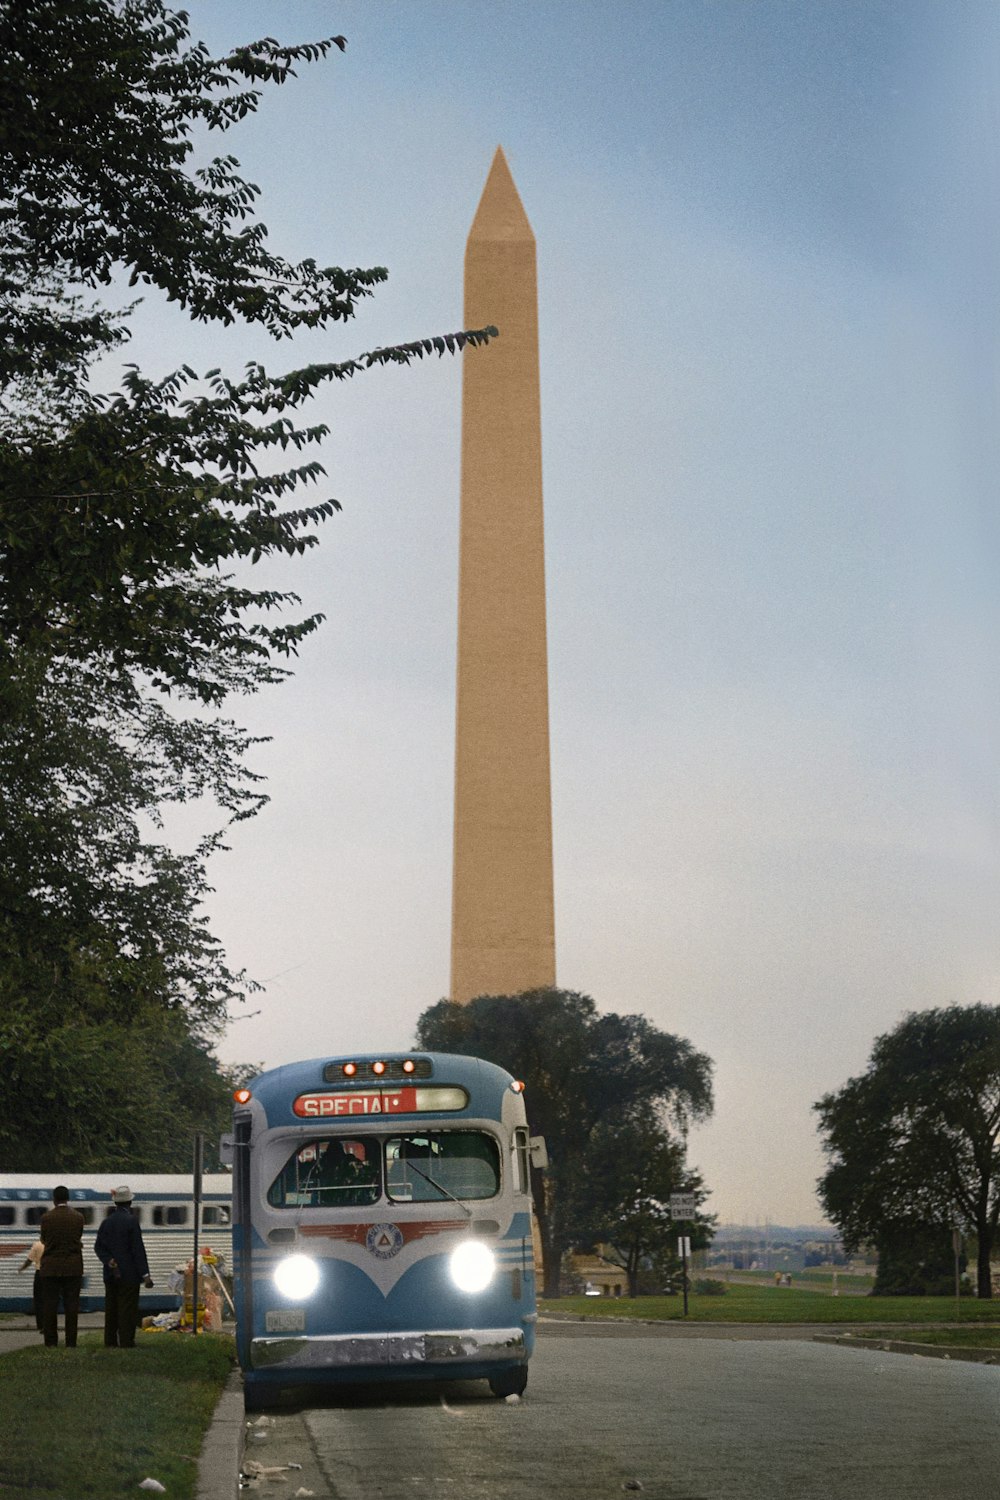 Buses departing in front of the Washington Monument after the Civil Rights March on Washington, D.C.